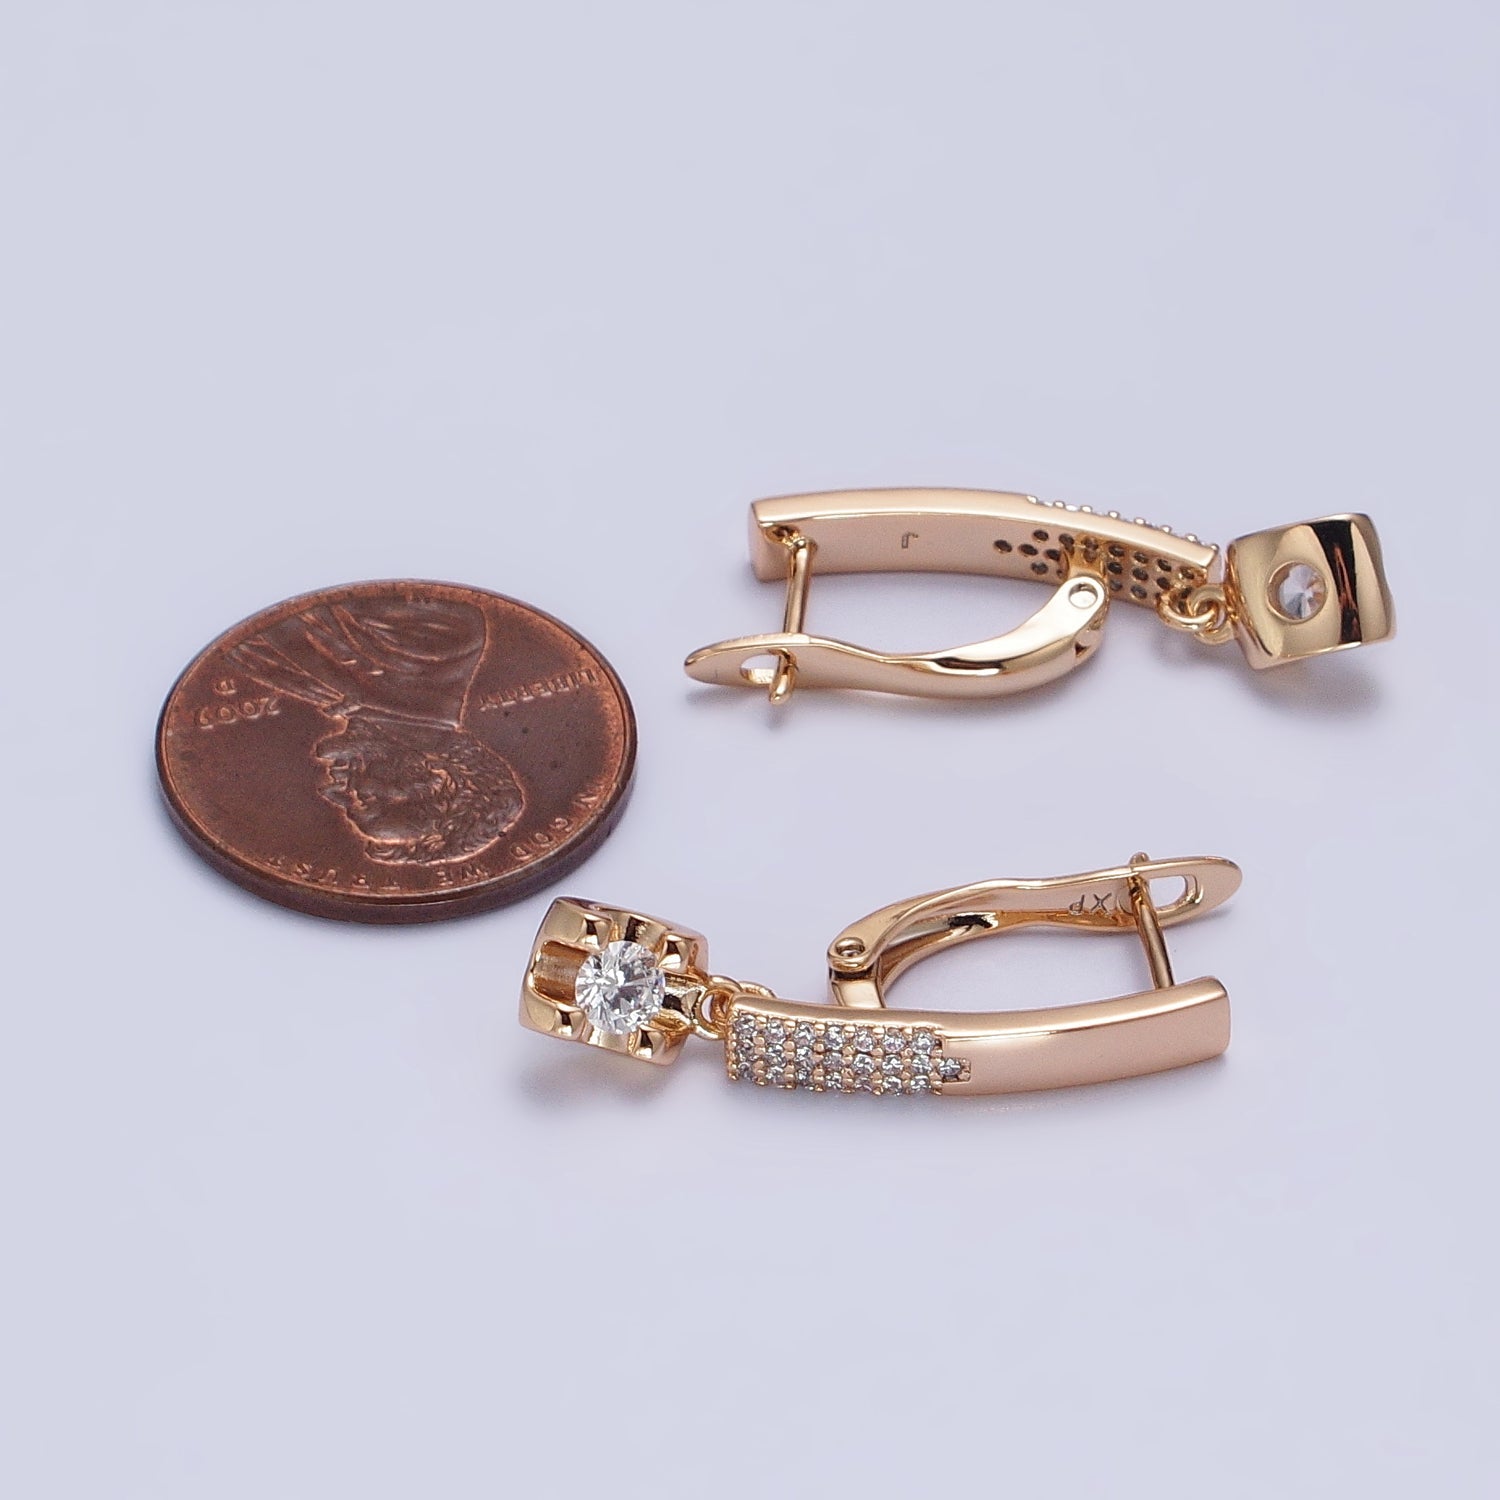 Dainty Huggie Earring Lever Back Earring with Small CZ Stone AB1057 - DLUXCA